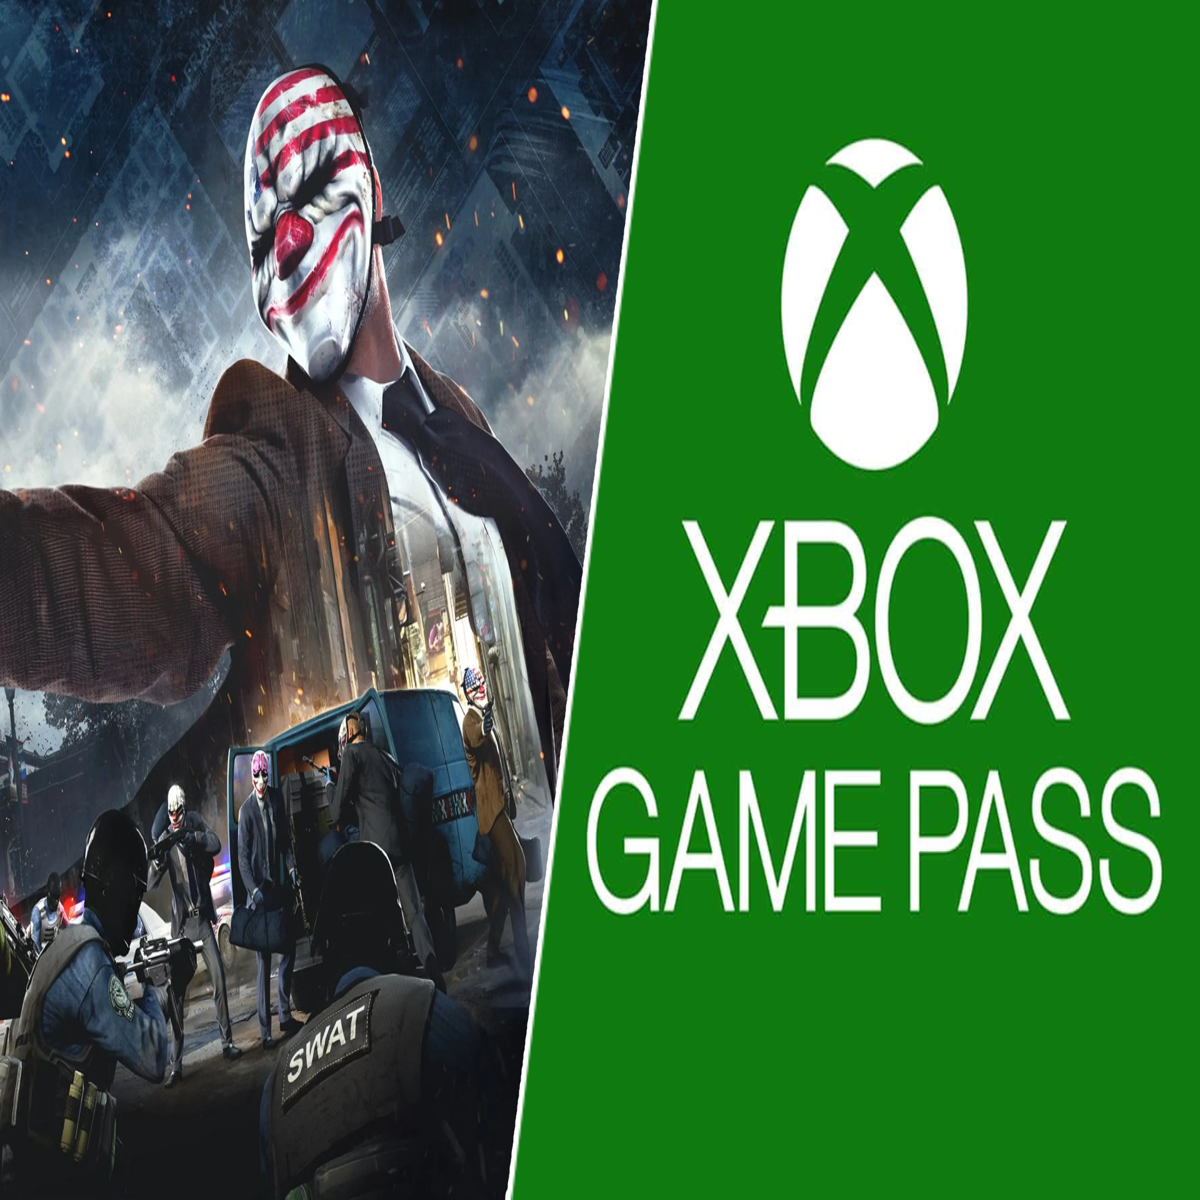 Payday 3 Xbox Series X Gameplay [Xbox Game Pass at Launch] Part 2 